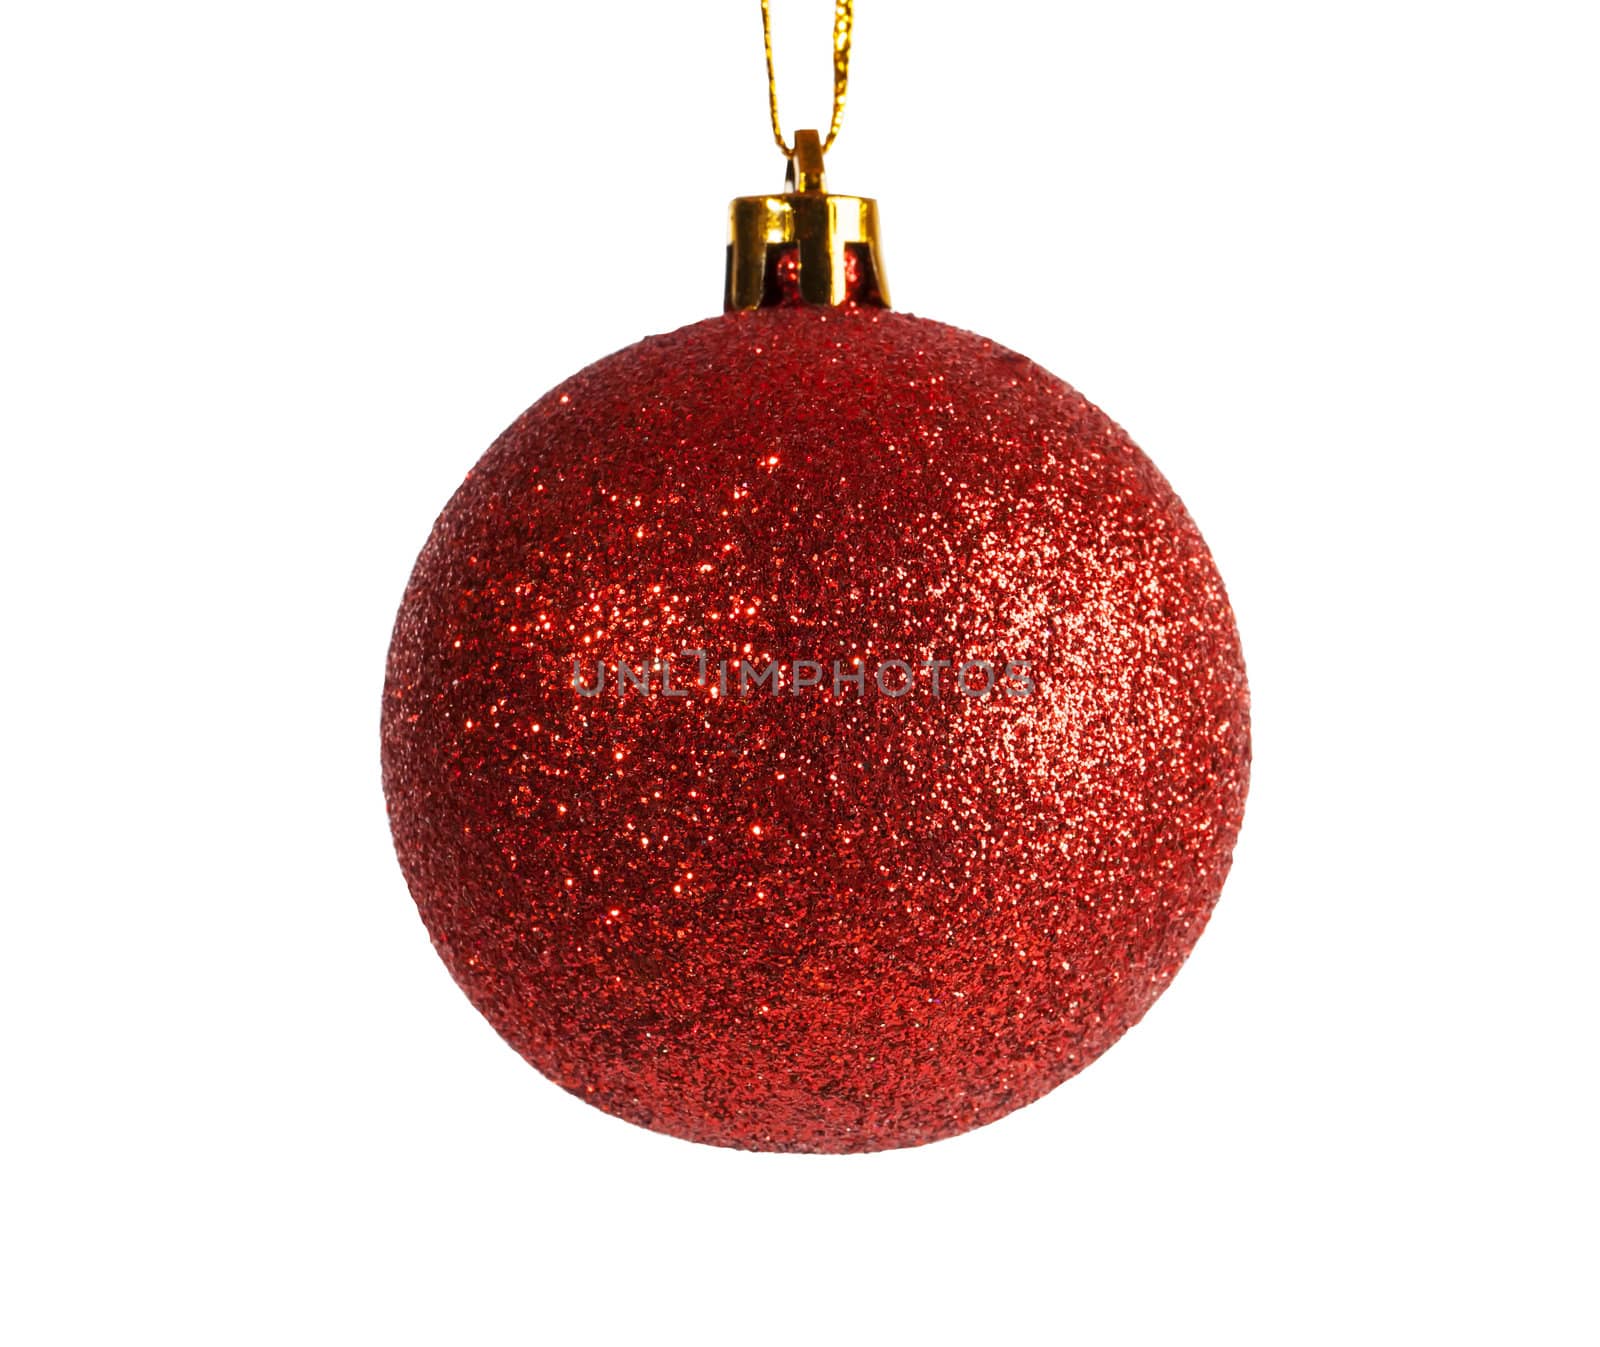 Red Christmas ball isolated on white by RawGroup